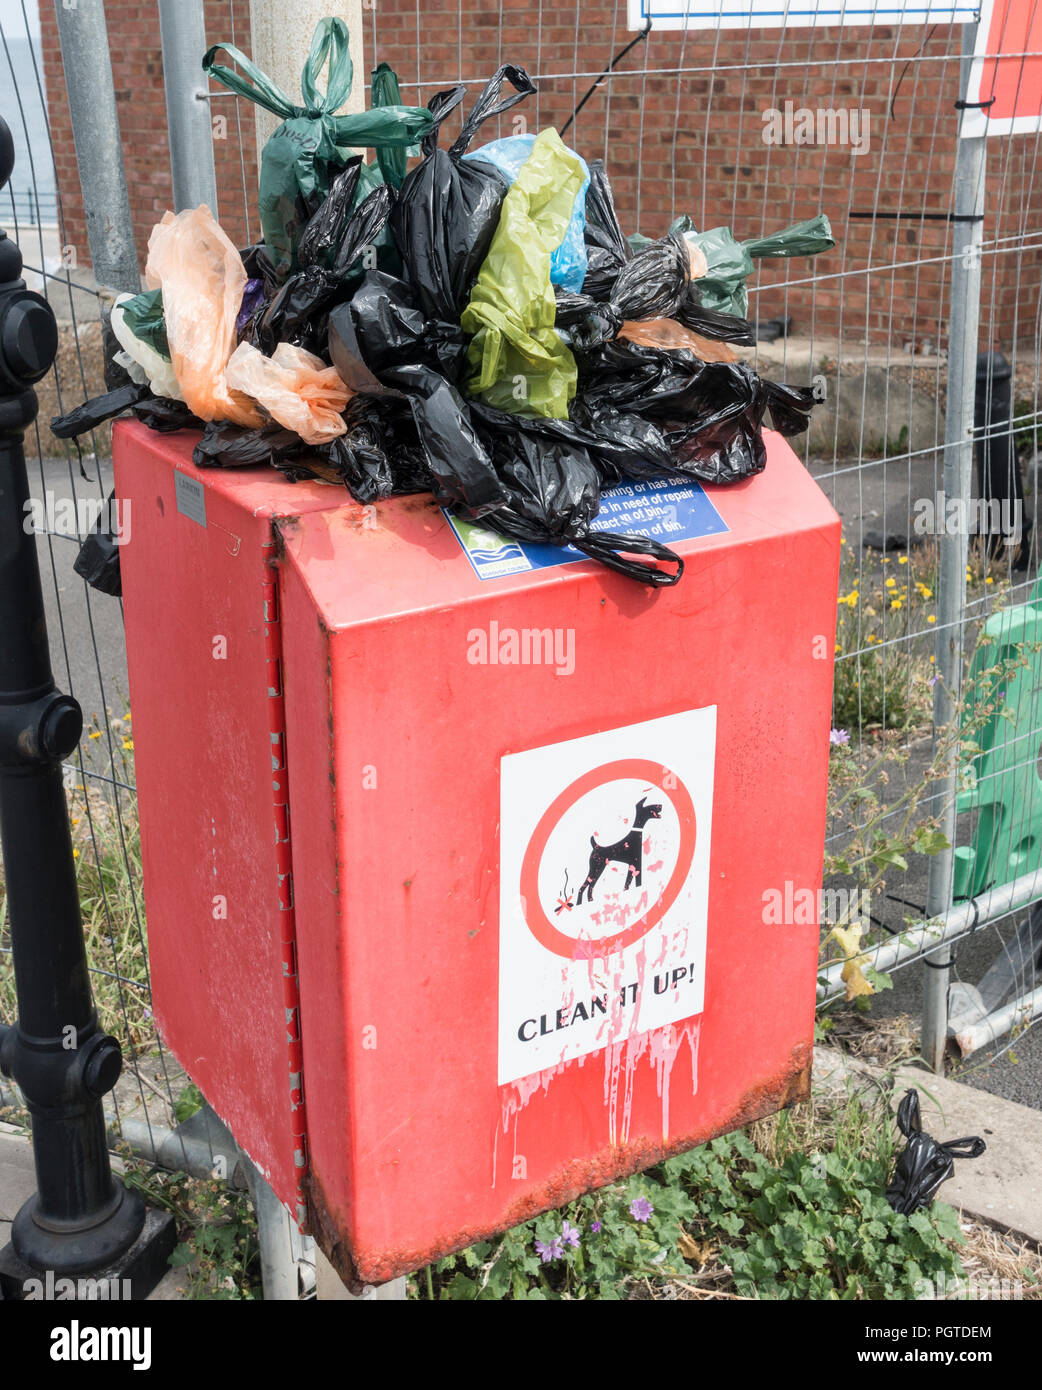 Bin overflowing with bags of dog poo. Stock Photo